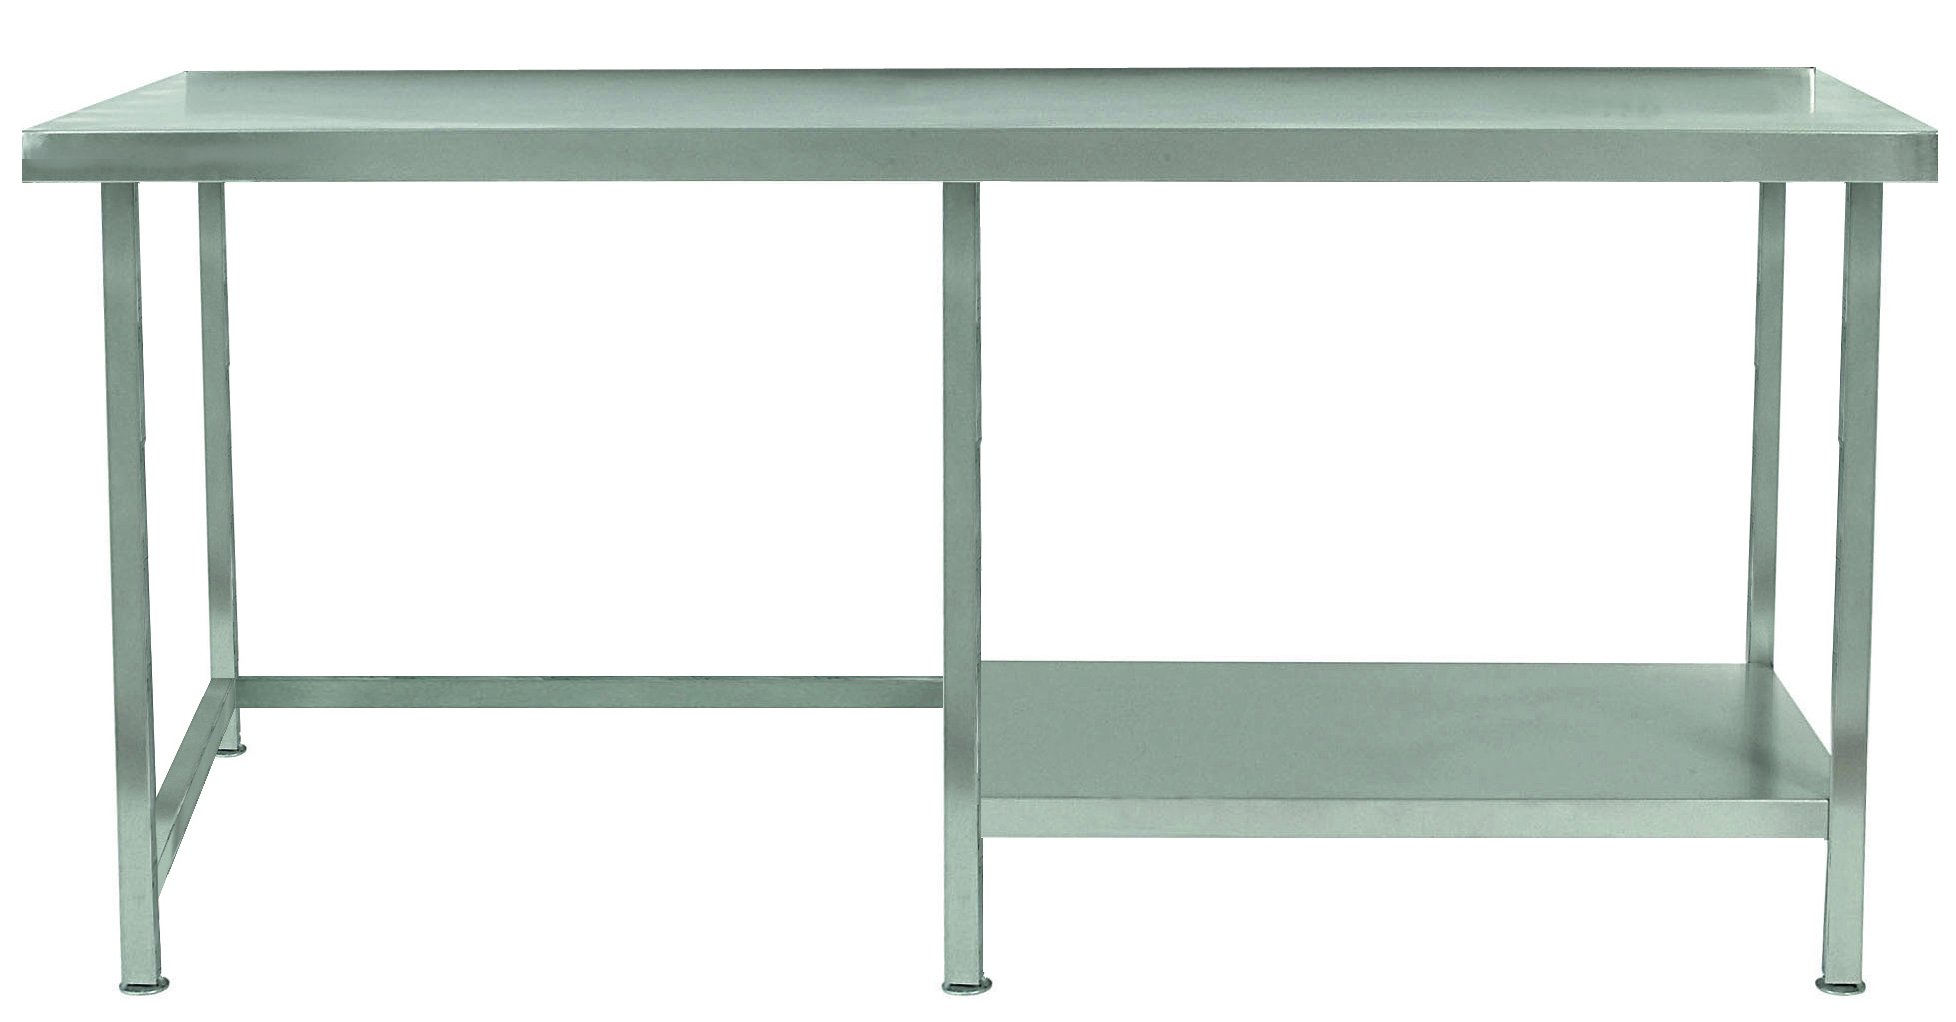 Stainless Steel Table with Right Side Undershelf. In a Choice of 9 Widths & 3 Depths